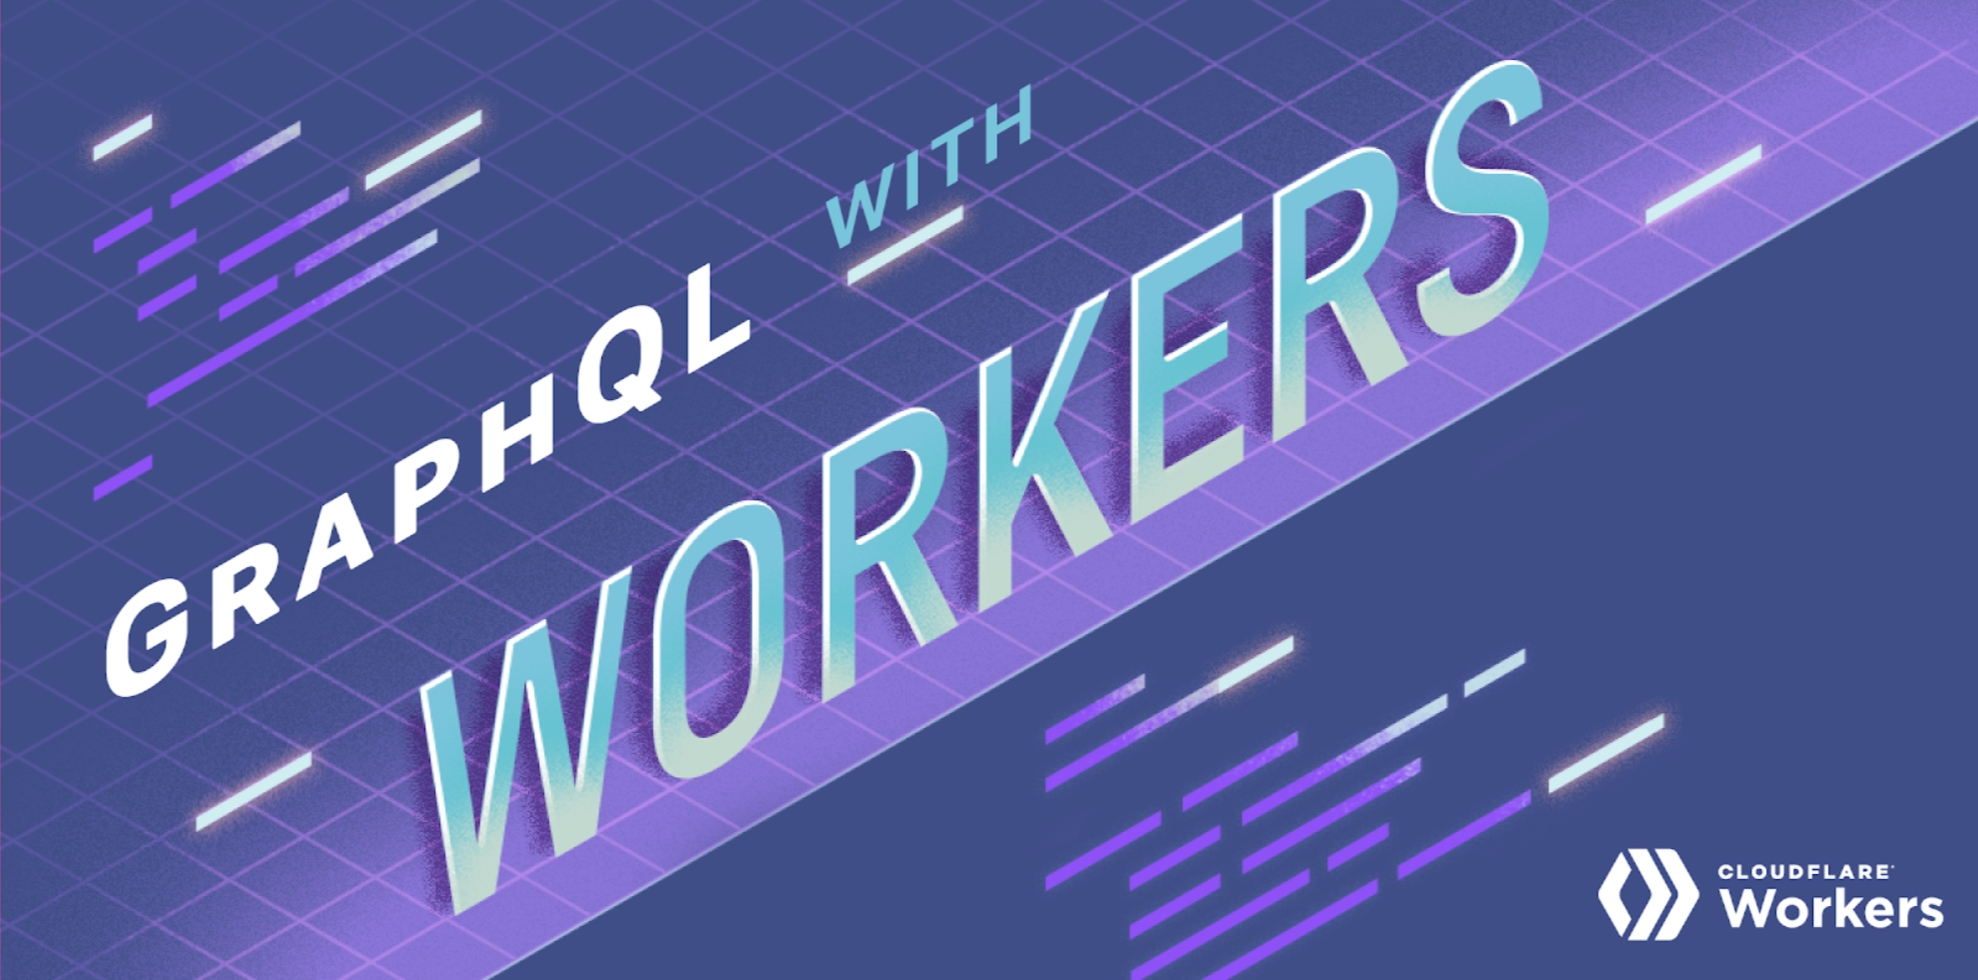 Building a GraphQL server on the edge with Cloudflare Workers